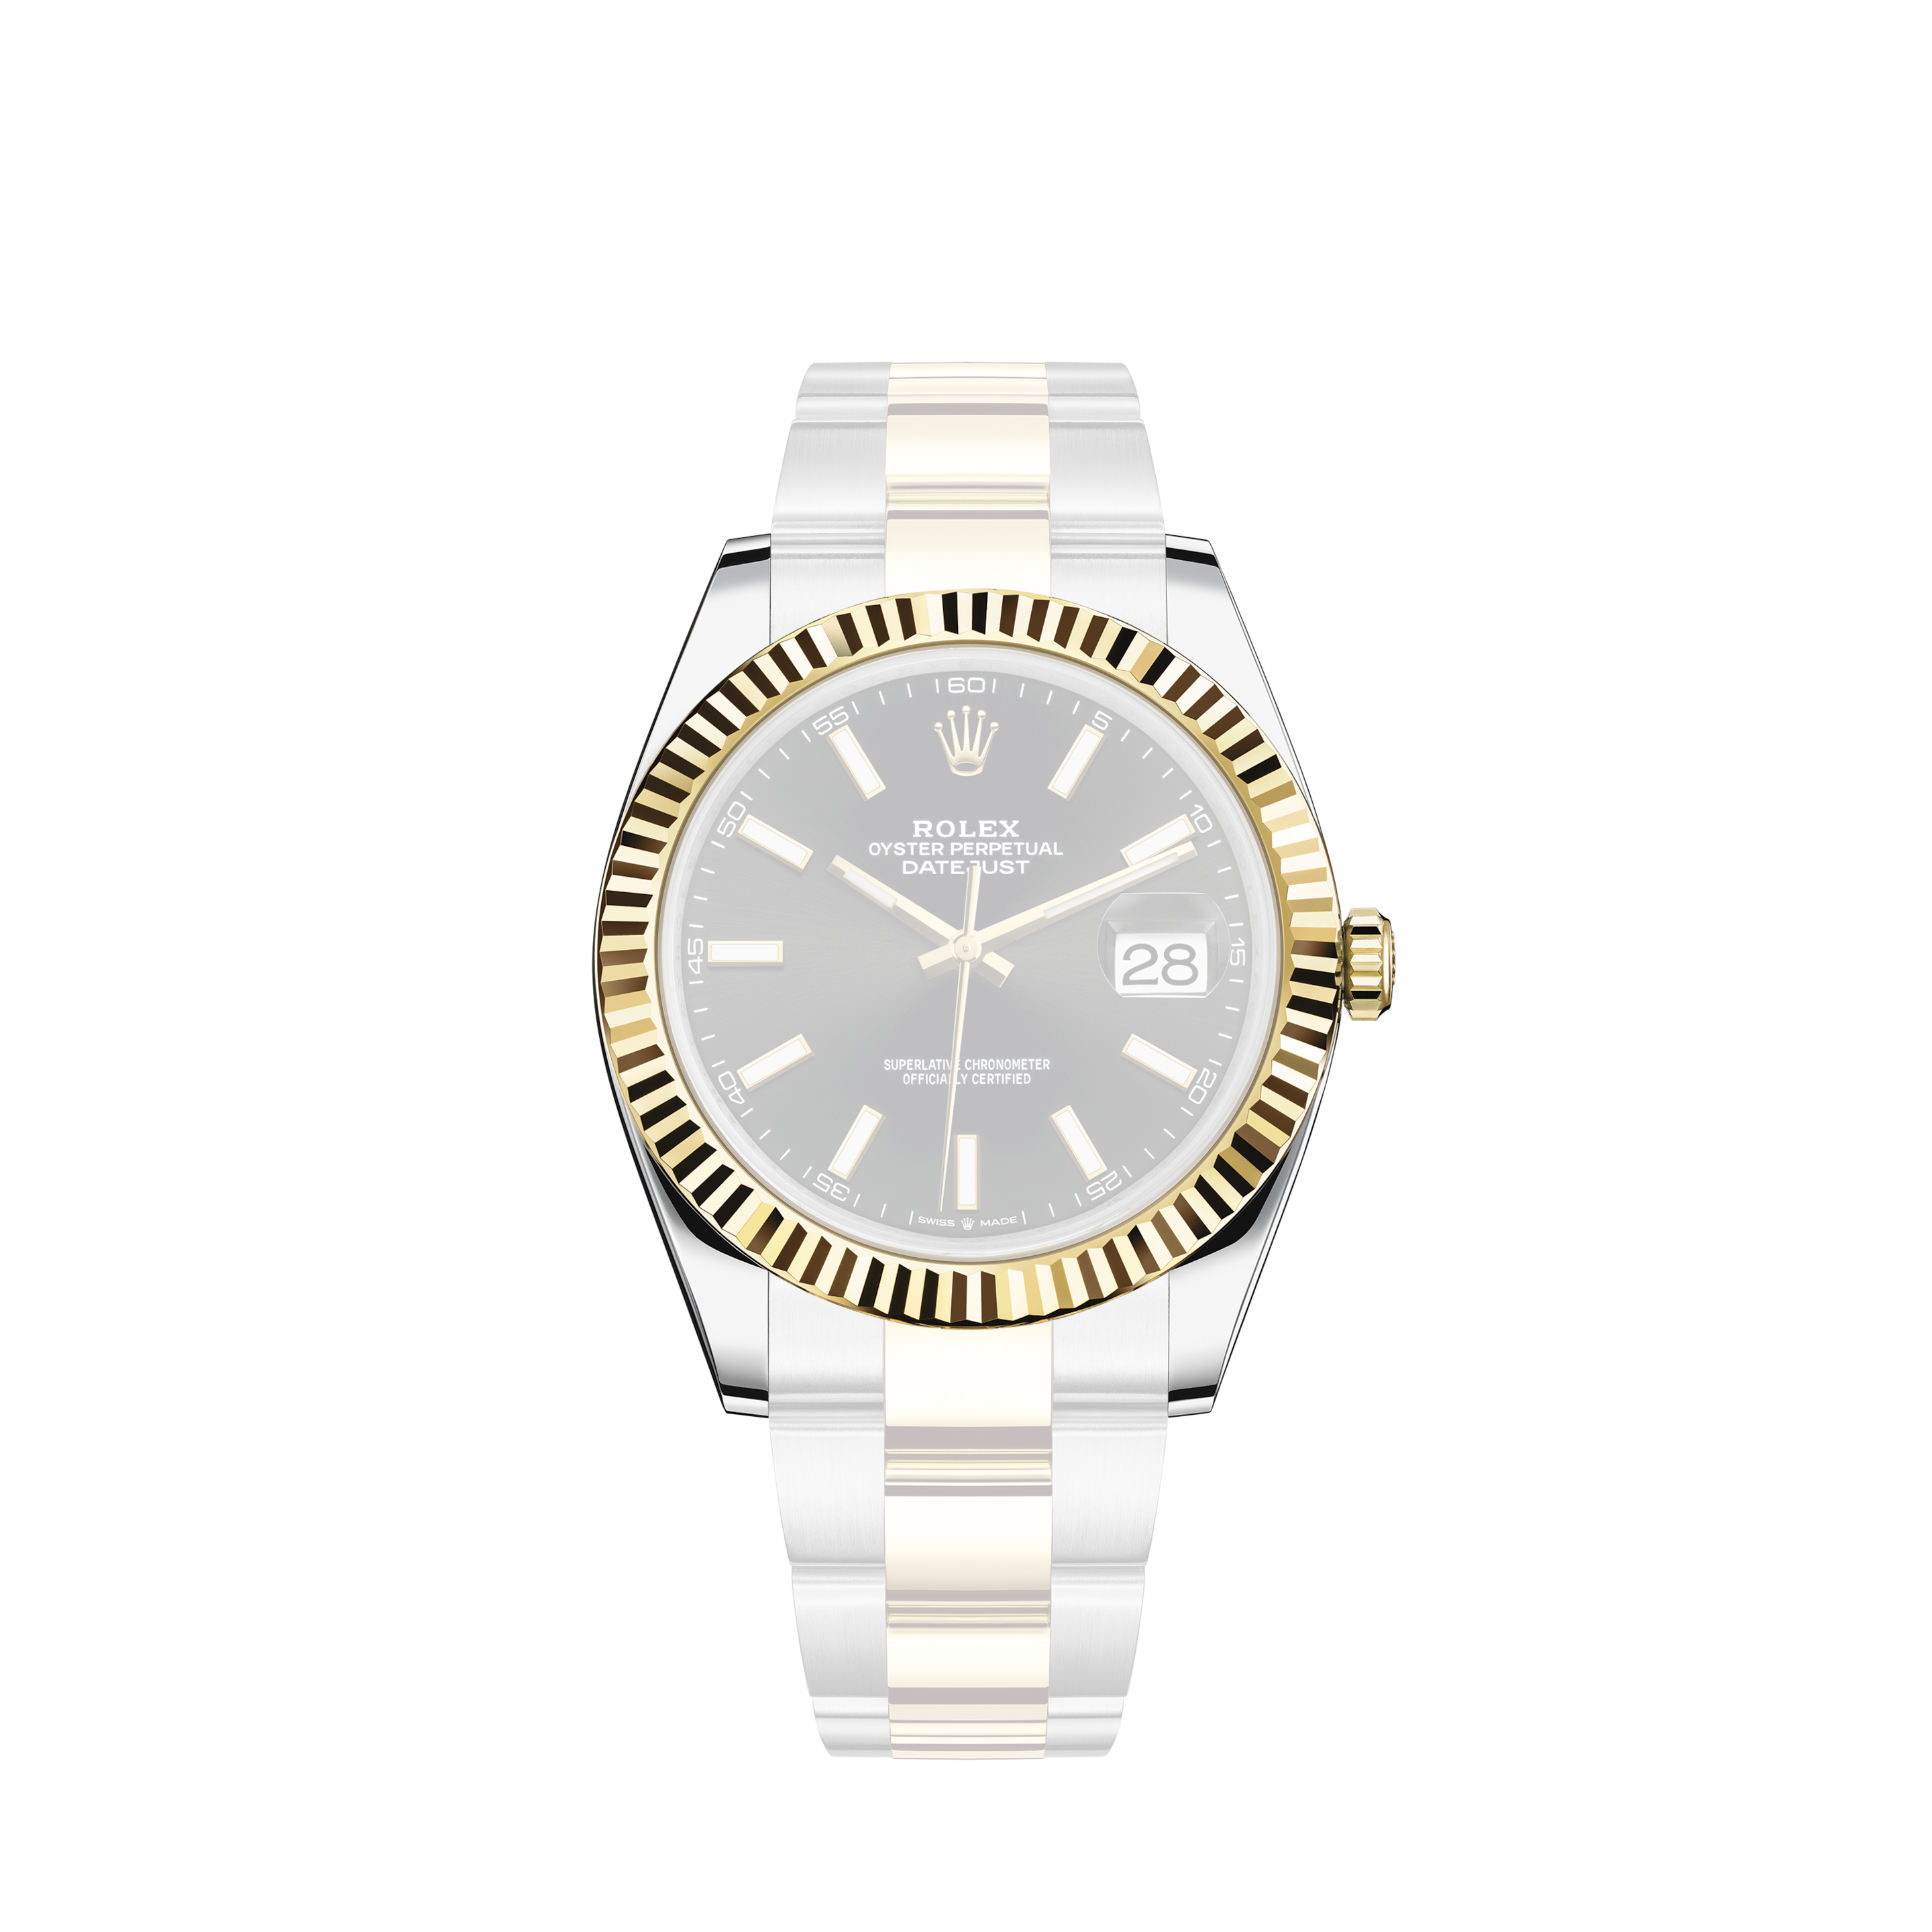 Rolex Datejust 116234 Oyster Band Black Anniversary Diamond Dial & Fluted Bezel